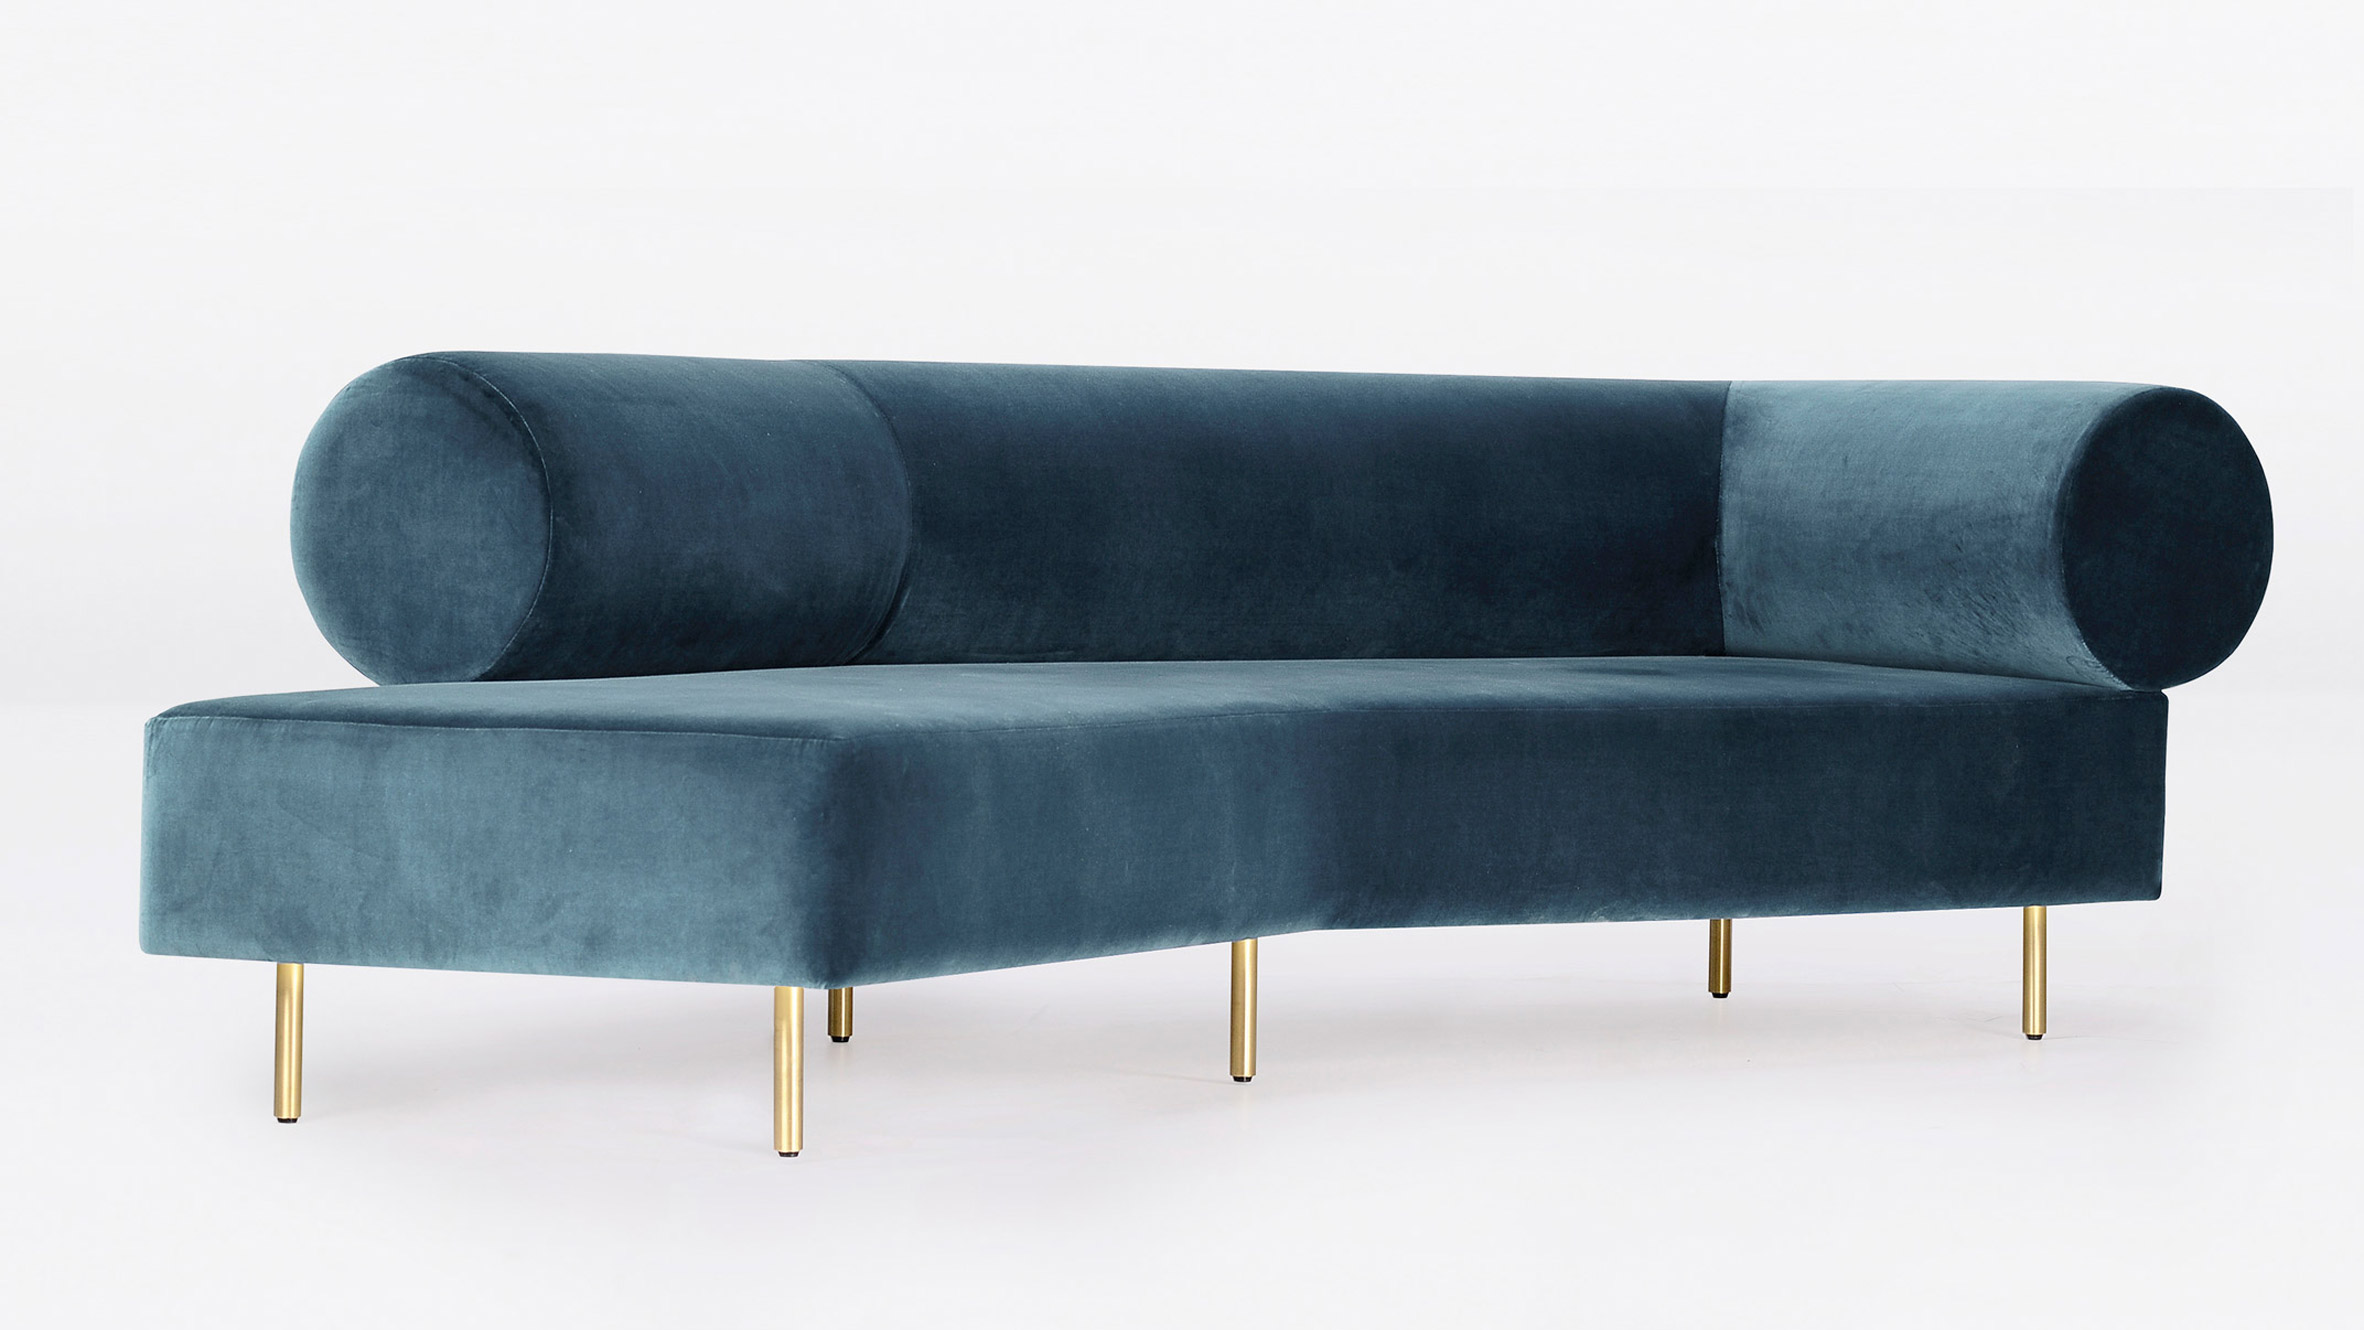 Paolo Ferrari uses rolled velvet cushions and bleached wood for Editions furniture collection